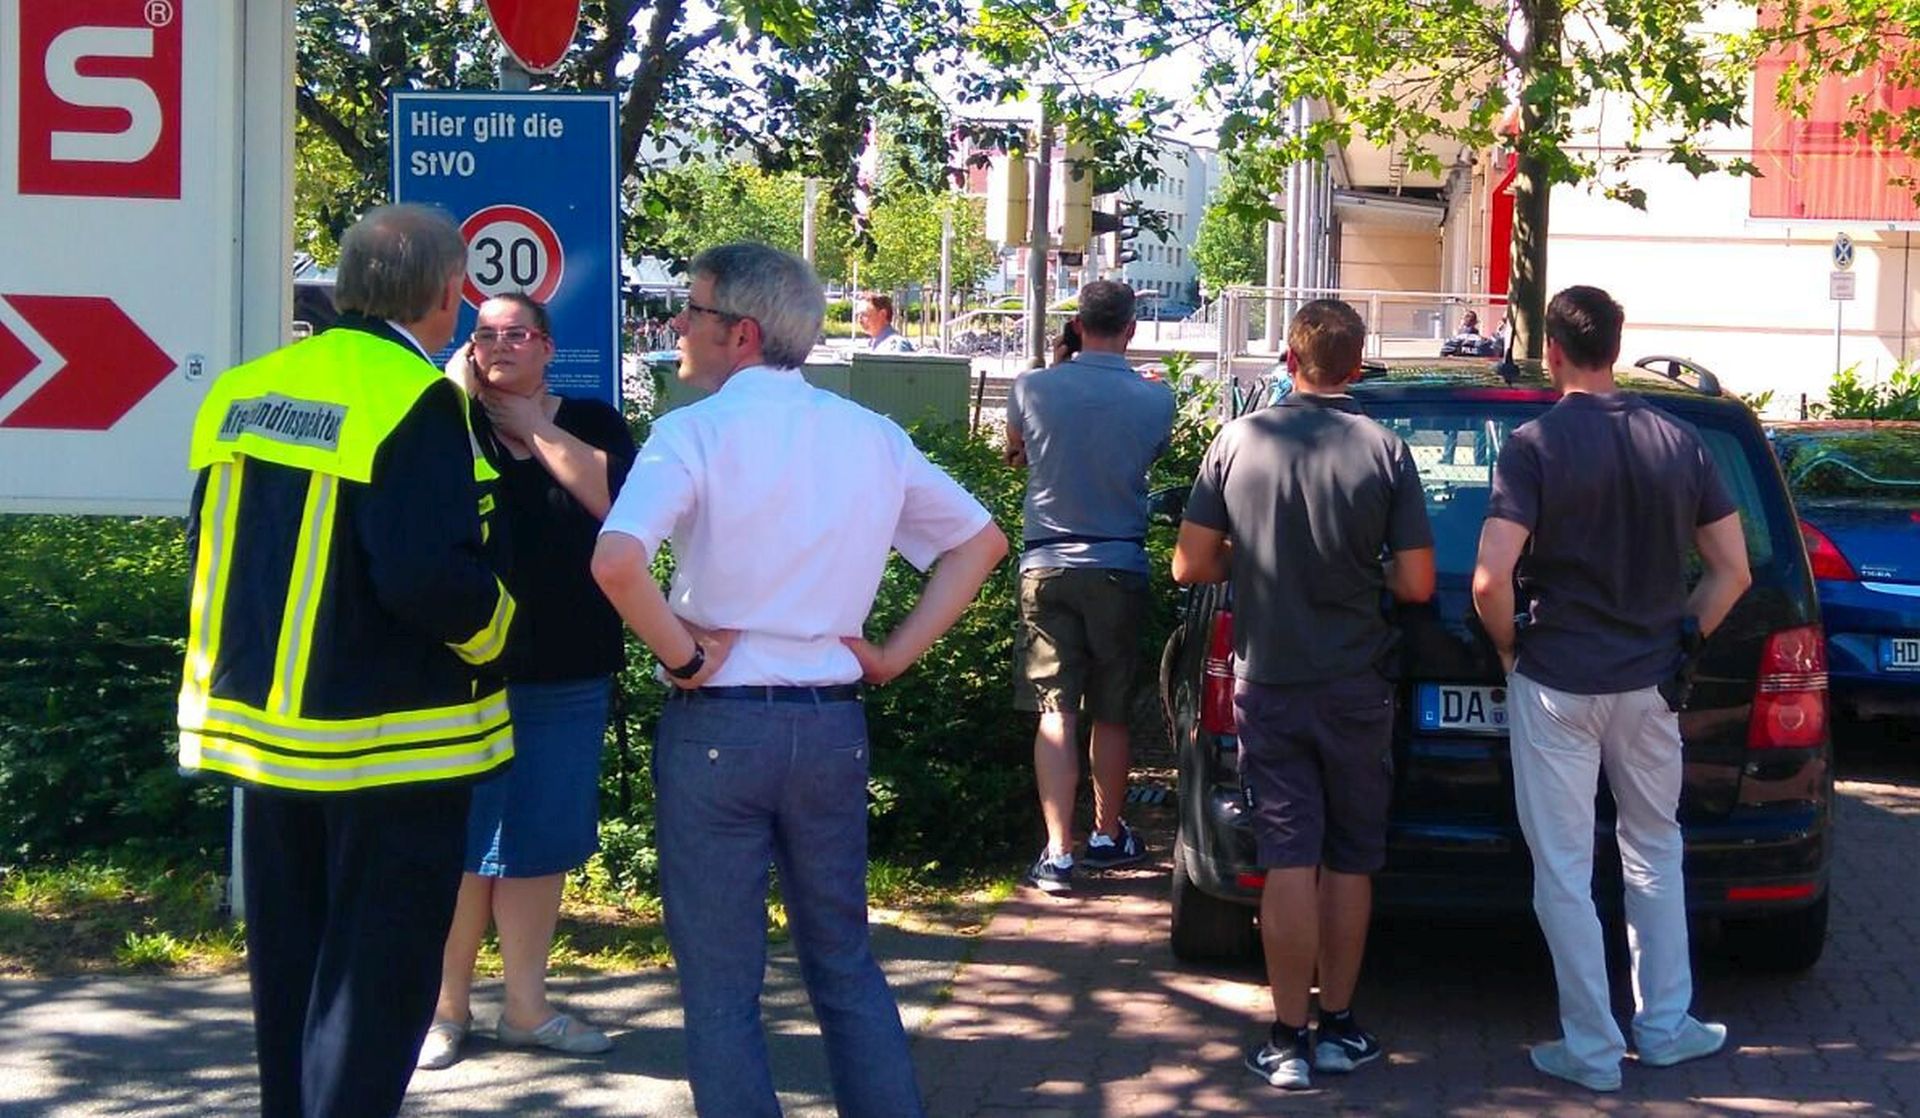 epa05386058 Police and passers by stand near to a cinema, in which an armed gunman was reported to have barricaded himself, in Vierheim, Germnay, 23 June 2016. Media reports cited the Interior minister of the state of Hesse, Peter Beuth, as saying that the attacker was killed. Special police forces (SEK) earlier had stormed the cinema in which the man was reported to have shot into the air. Several dozens of visitors of the cinema reportedly were injured by irtritant gas used by the police.  EPA/Einsatzreport Suedhessen